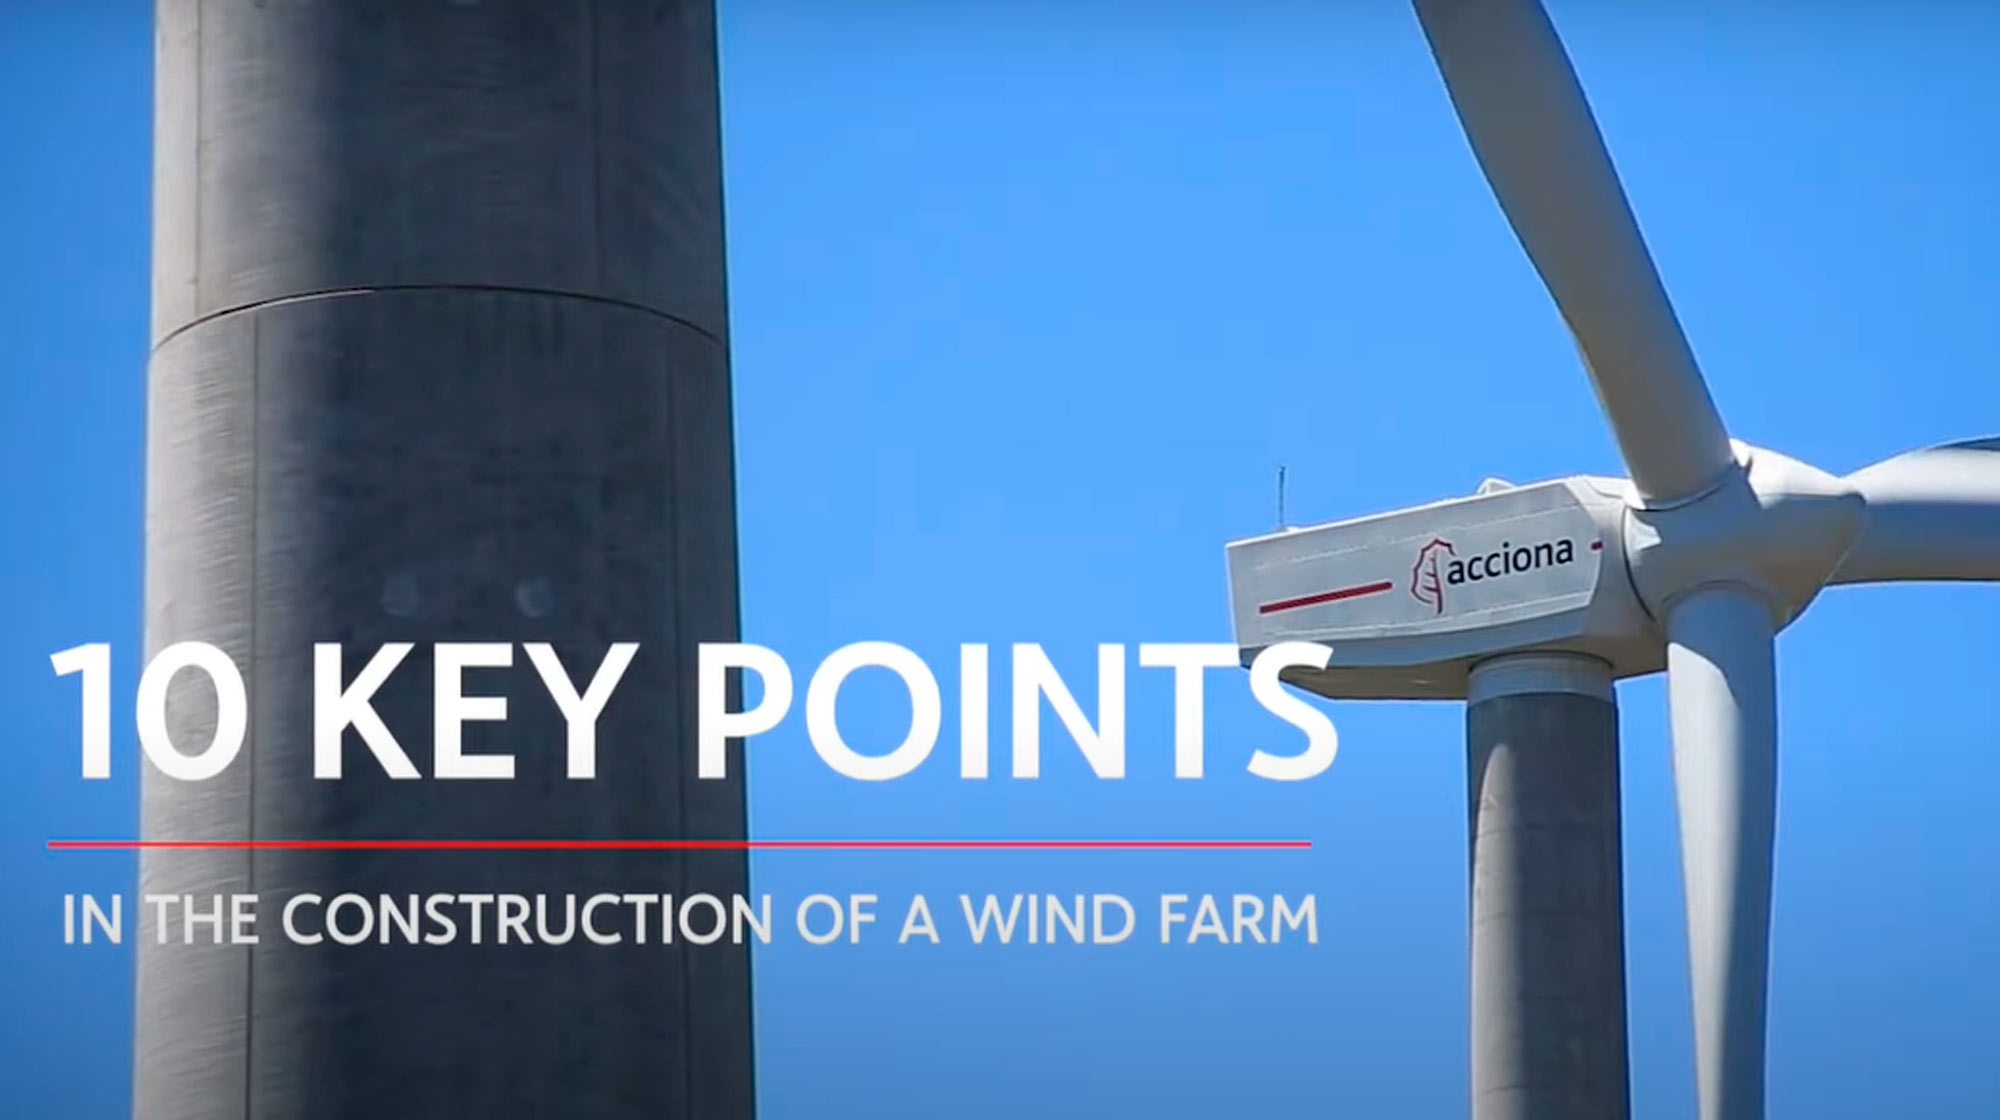 Ten key points in the construction of a #windfarm